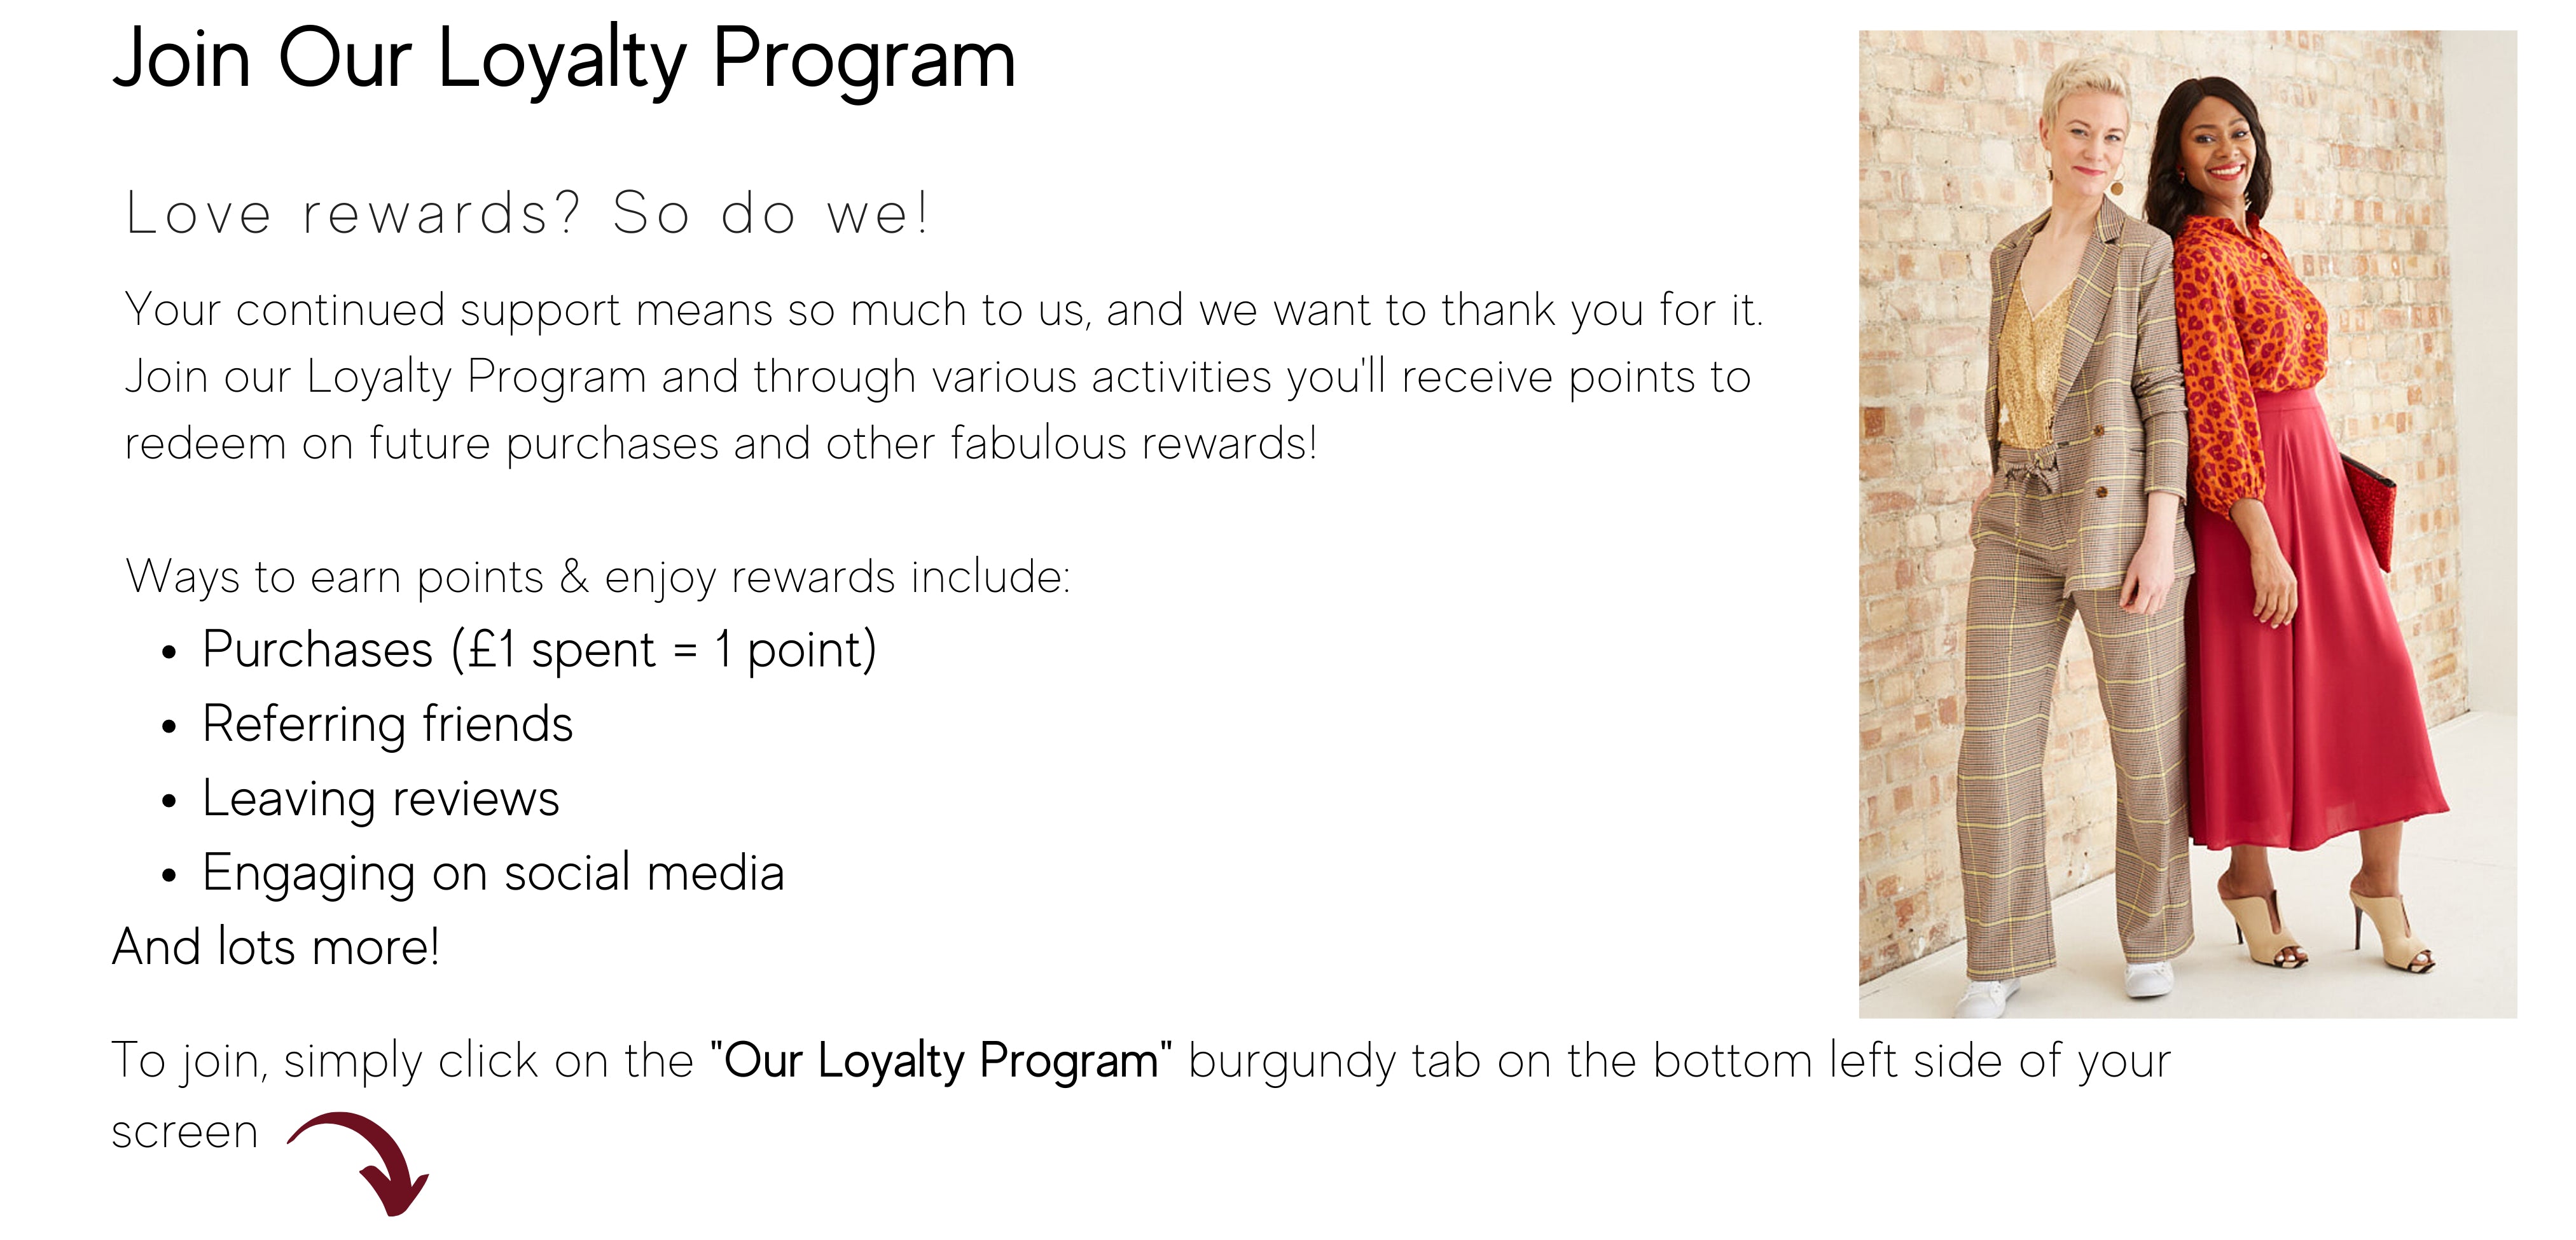 Join Our Loyalty Program. Love Rewards? So Do We! Your continued support means so much to us, and we want to thank you for it.  Join our Loyalty Program and through various activities you'll receive points to redeem on future purchases and other fabulous rewards! To join, simply click on the "Our Loyalty Program" burgundy tab on the bottom left side of your screen